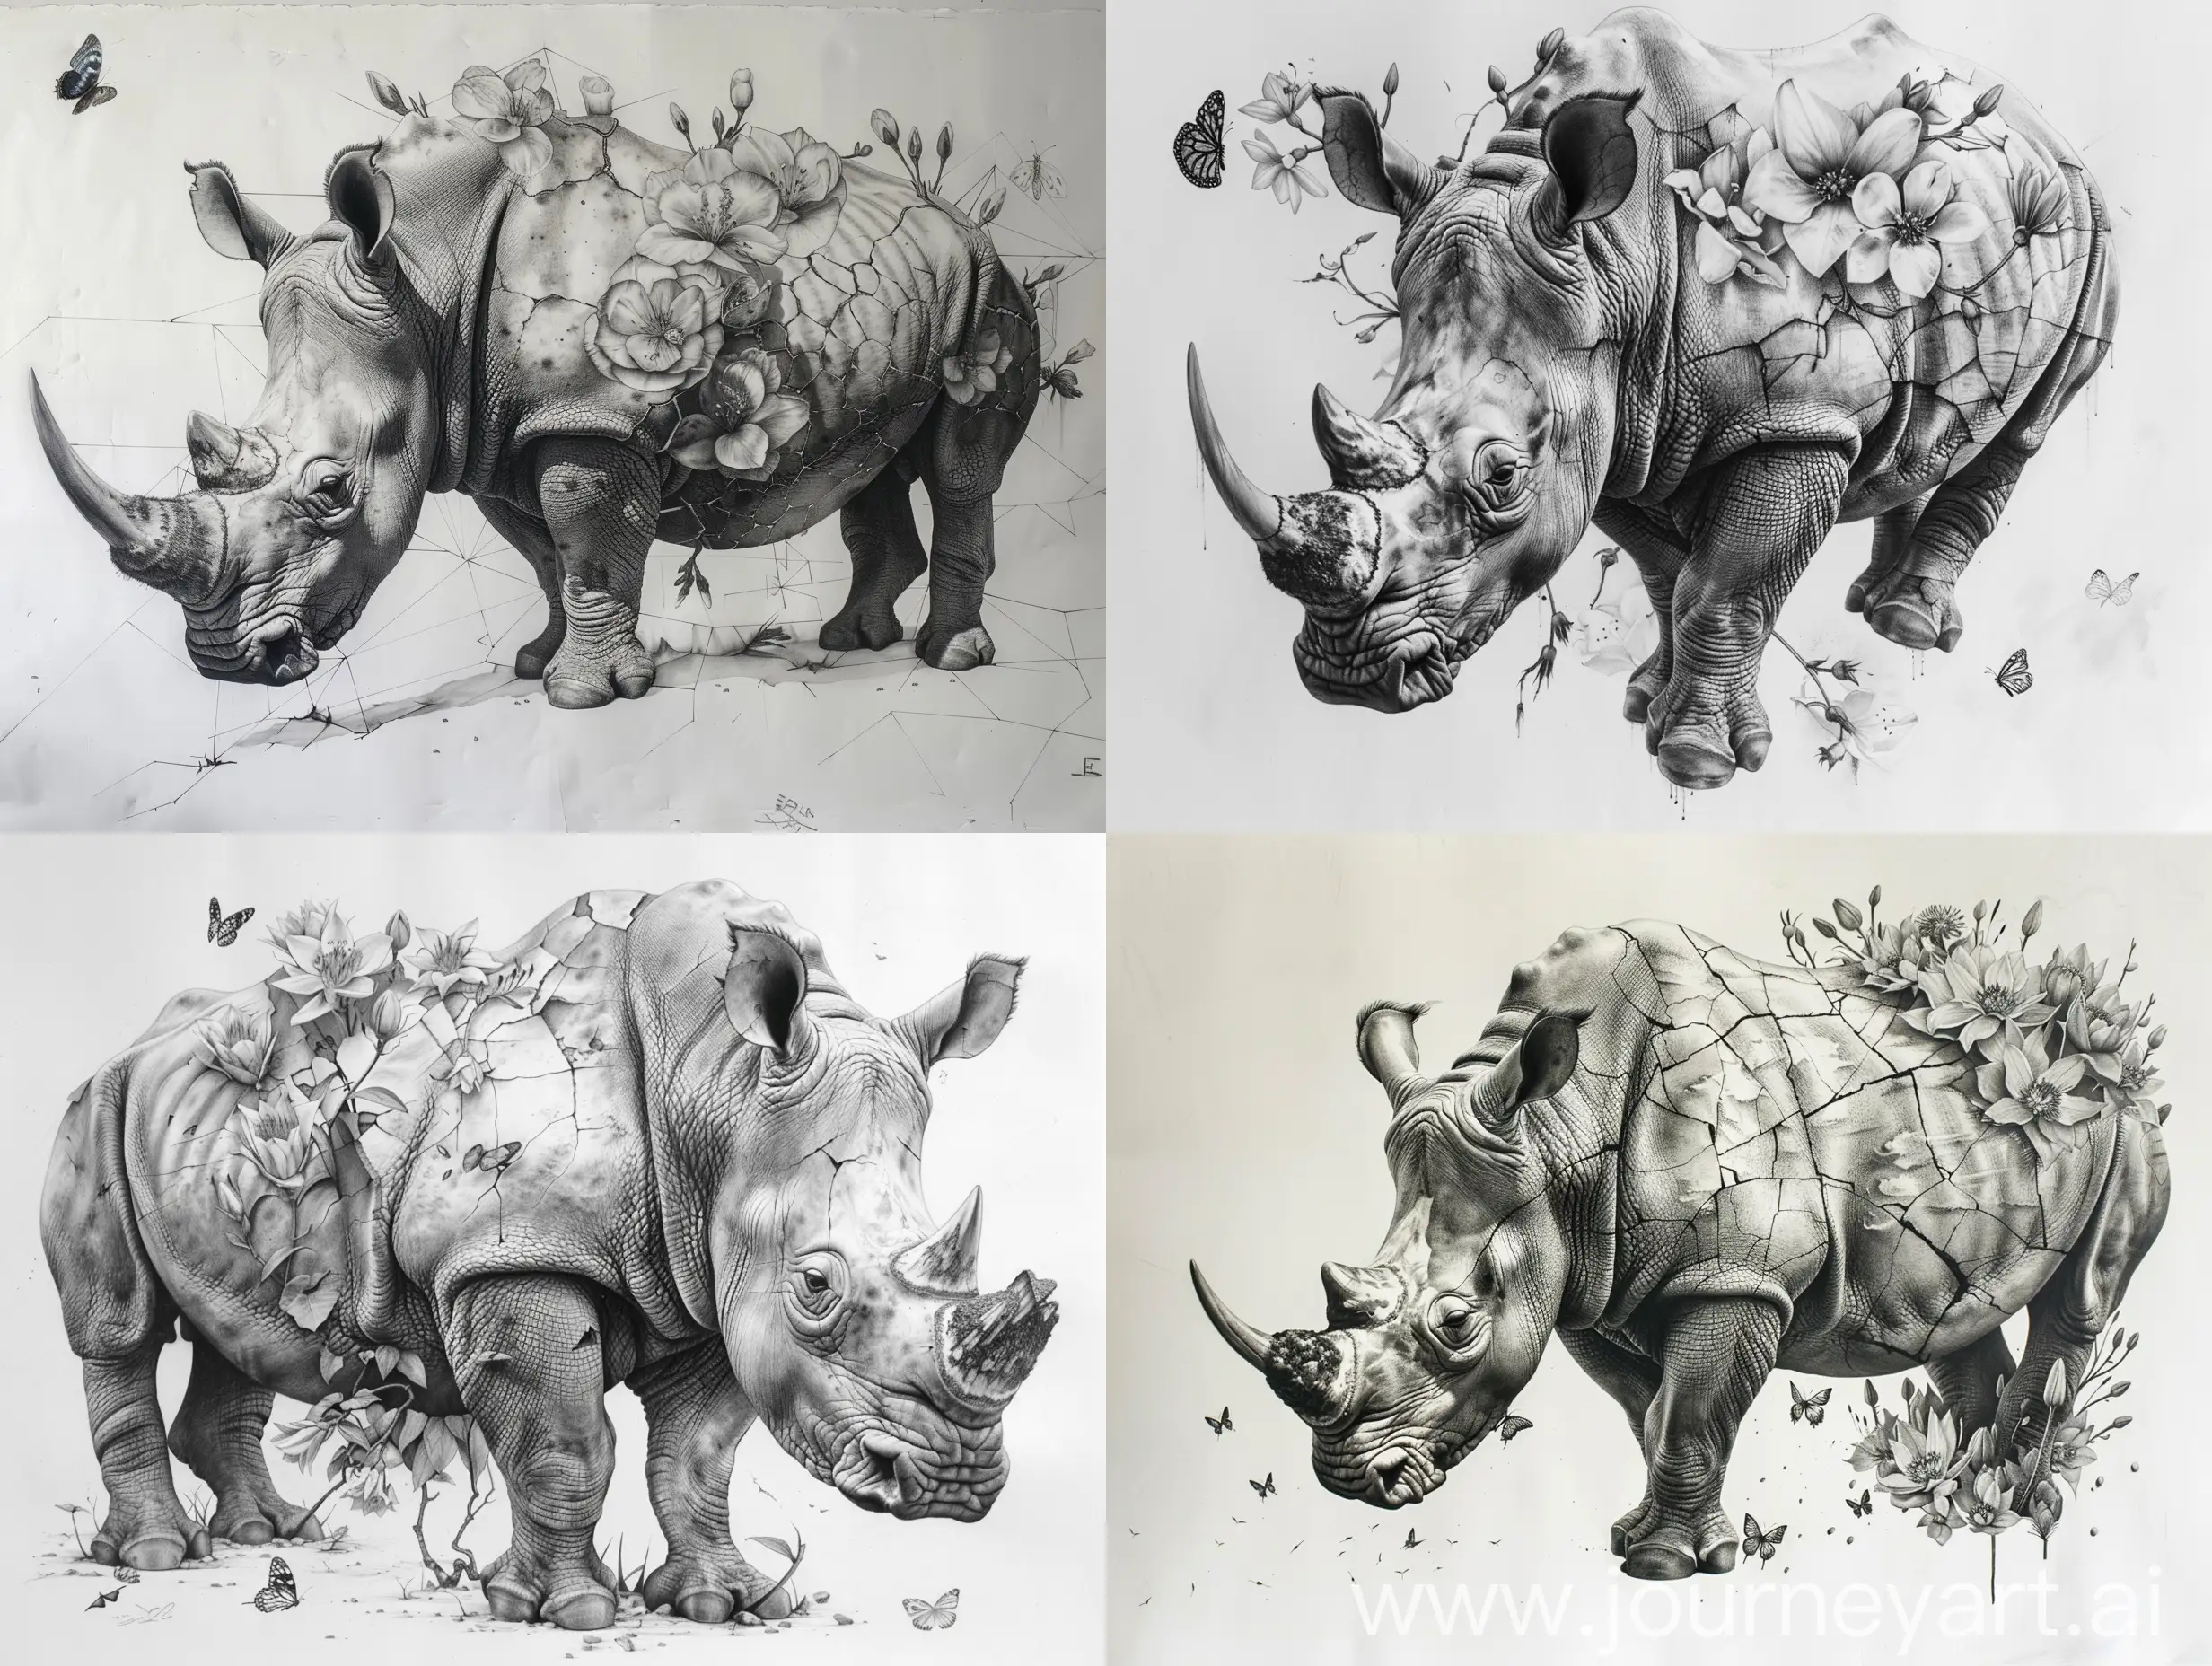 Hyper-Realistic-Rhino-Pencil-Sketch-with-Cracking-Floral-Transformation